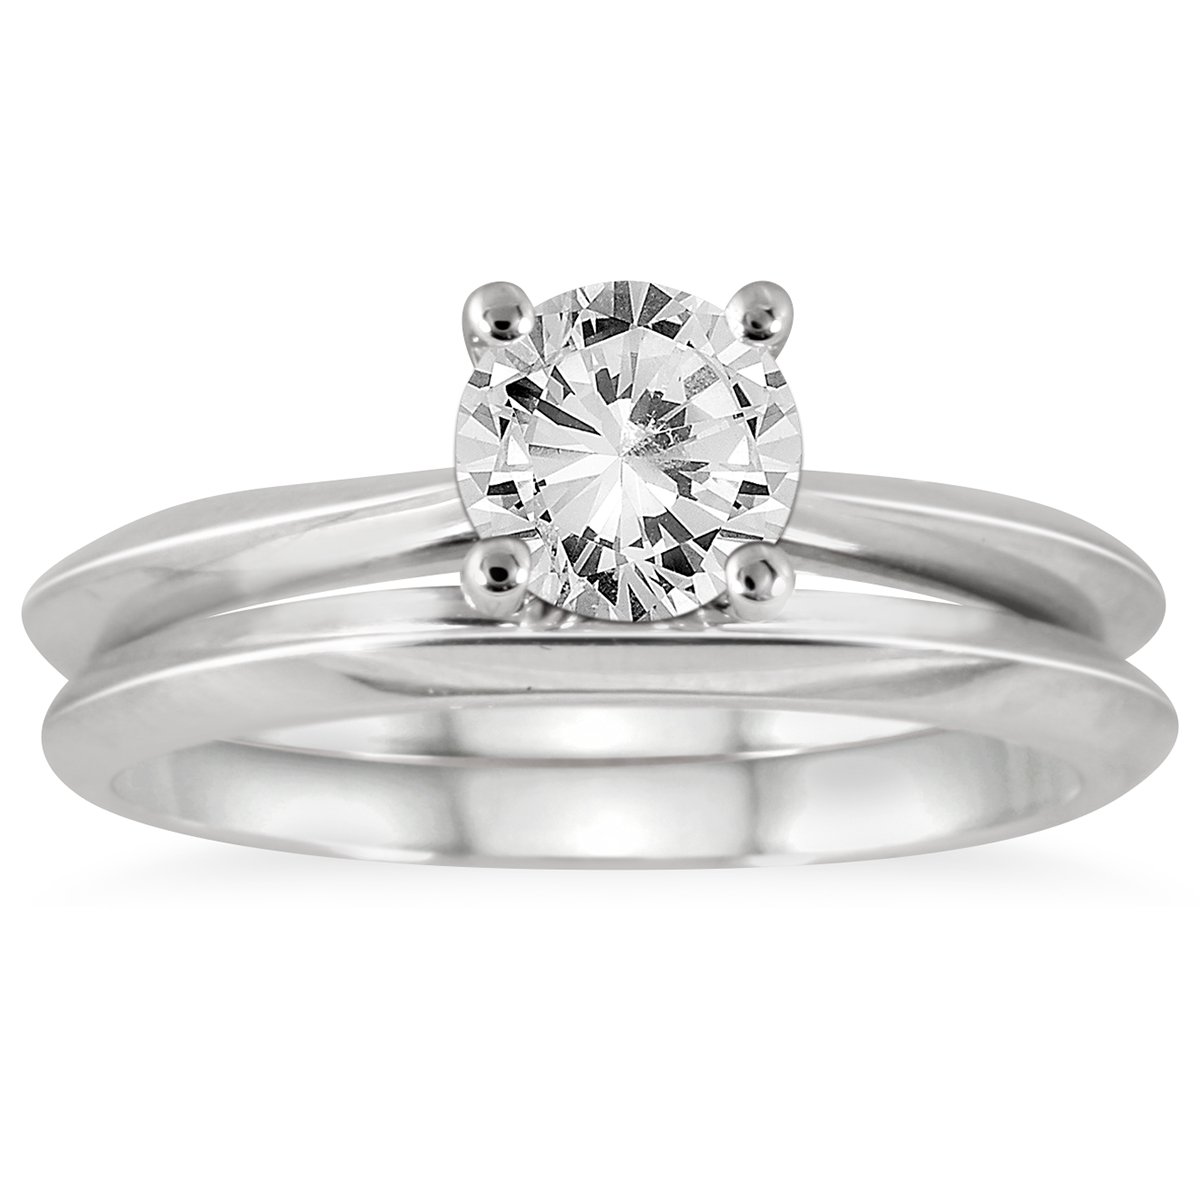 Image of AGS Certified 1 Carat Knife Edge Diamond Bridal Solitaire Set in 14K White Gold (J-K Color I2-I3 Clarity)